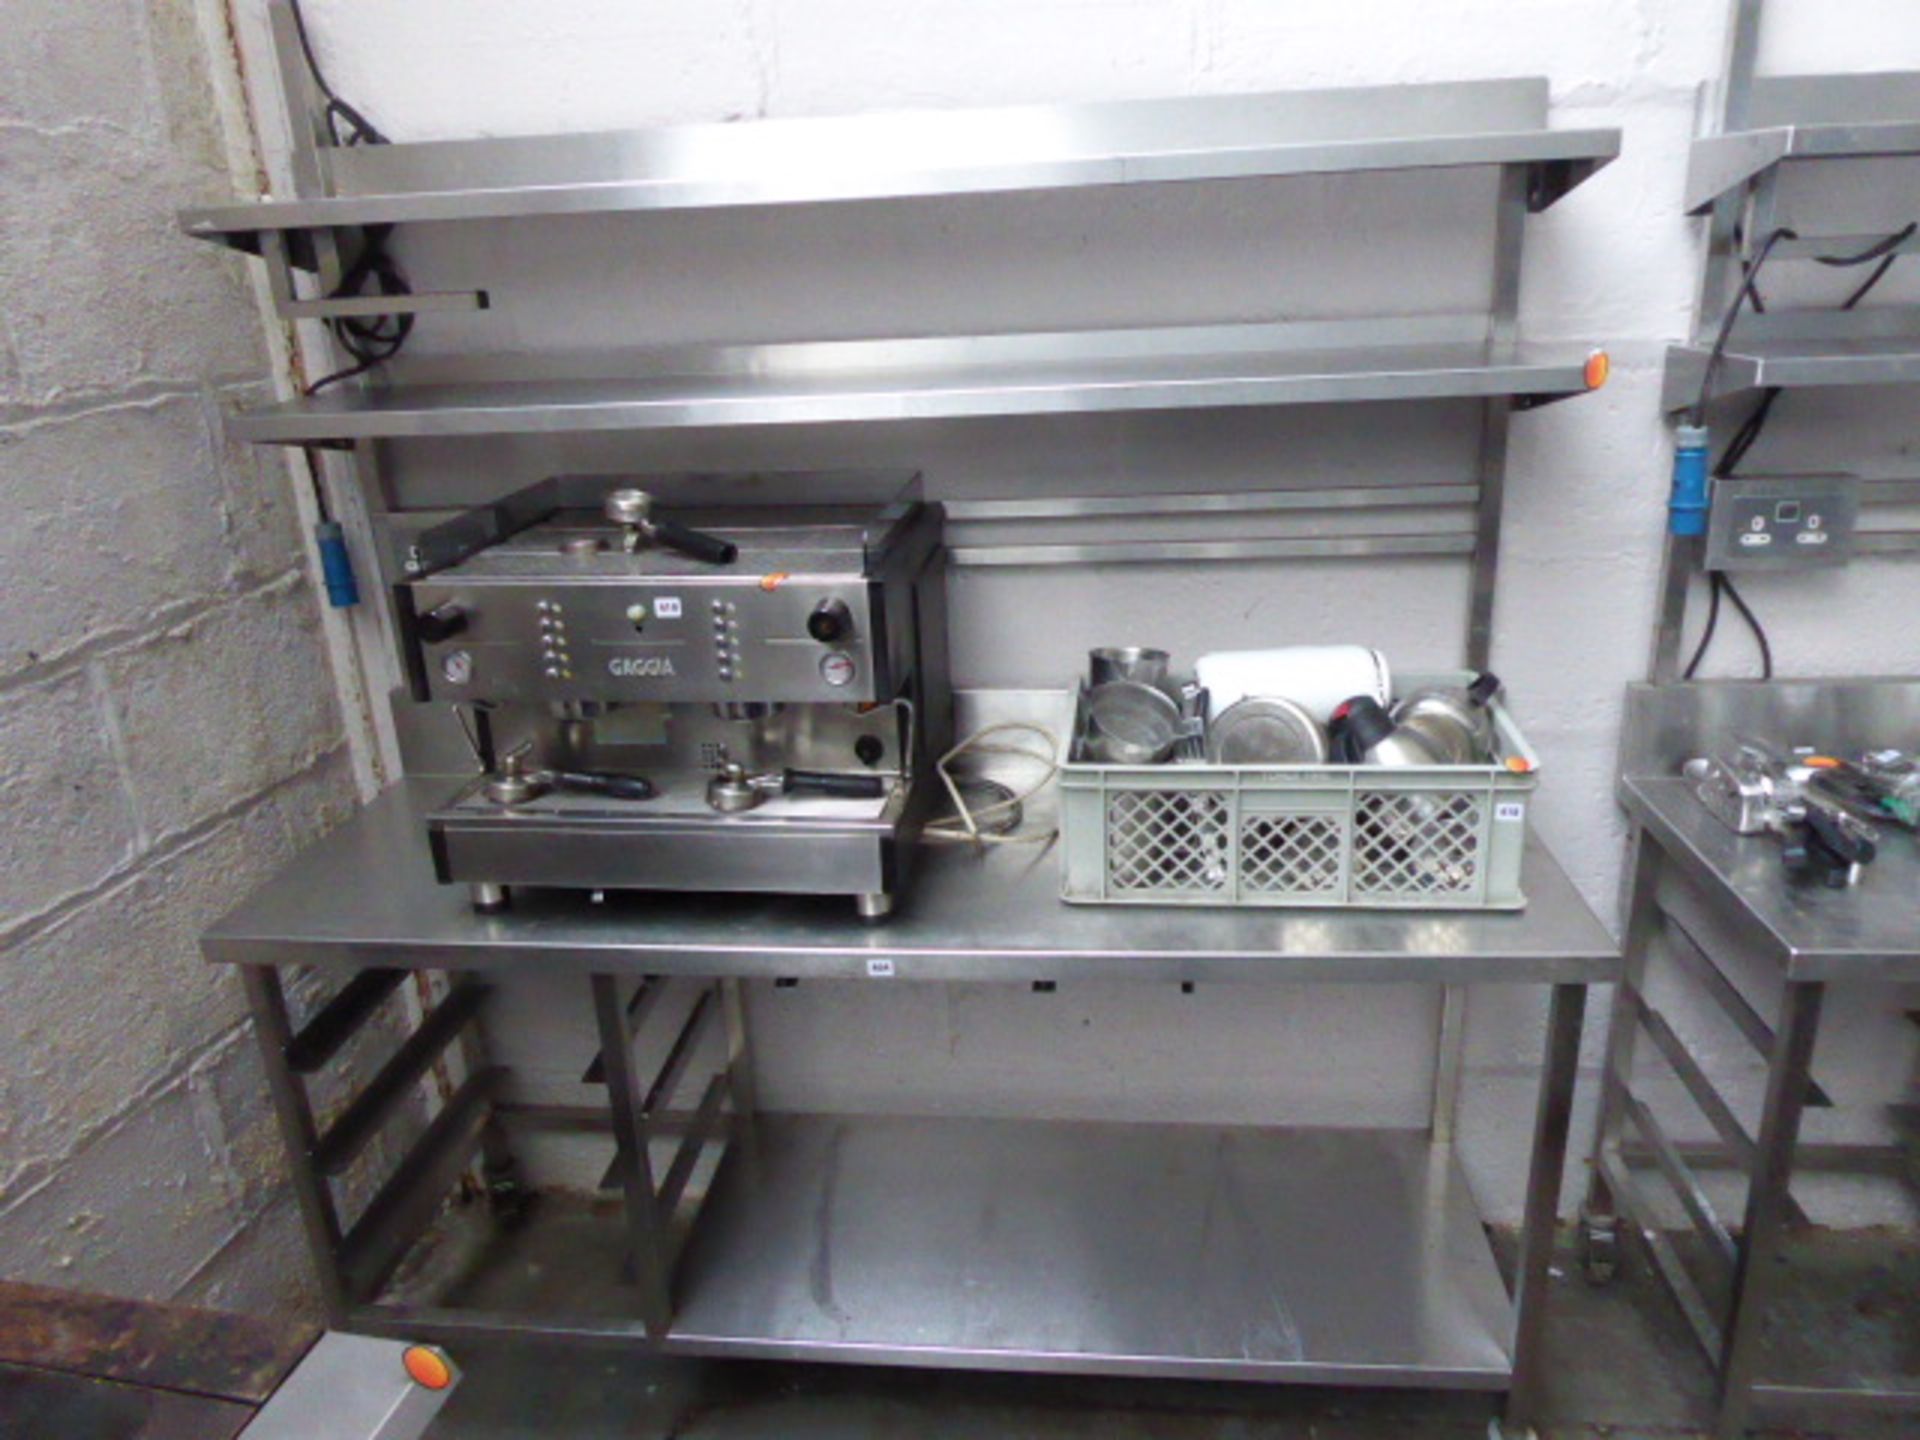 180cm stainless steel mobile preparation station with 2 shelves over and shelf under with space